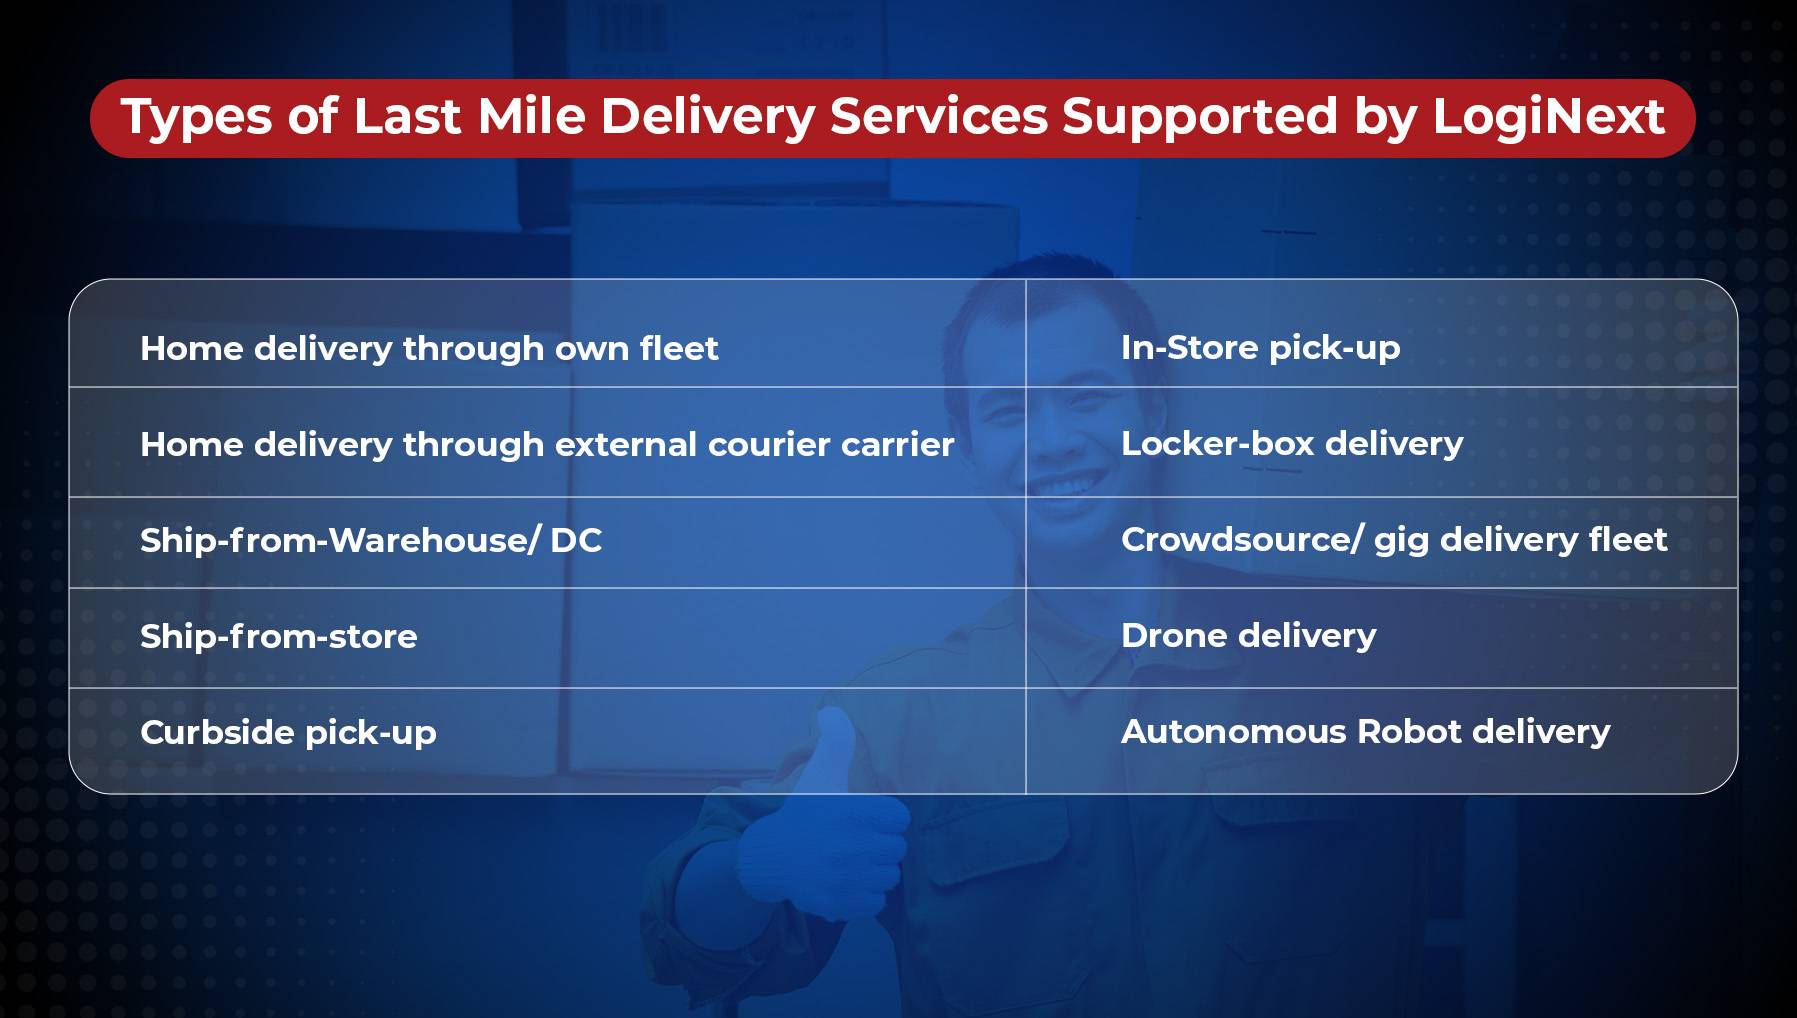 Types of Last Mile Delivery Services Offered by LogiNext